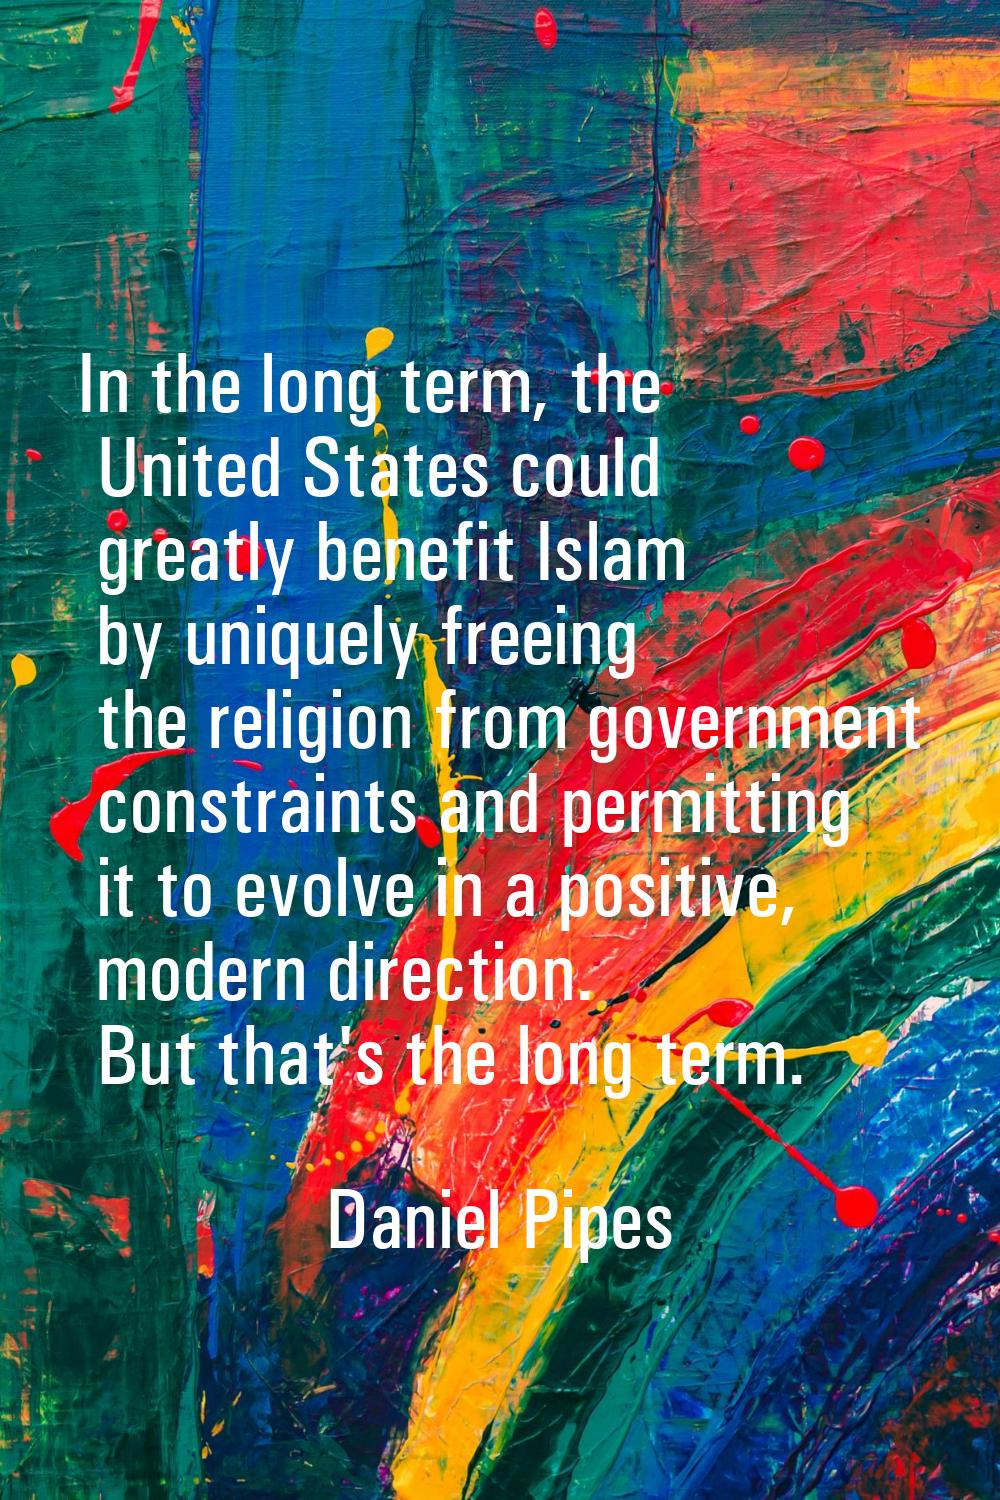 In the long term, the United States could greatly benefit Islam by uniquely freeing the religion fr